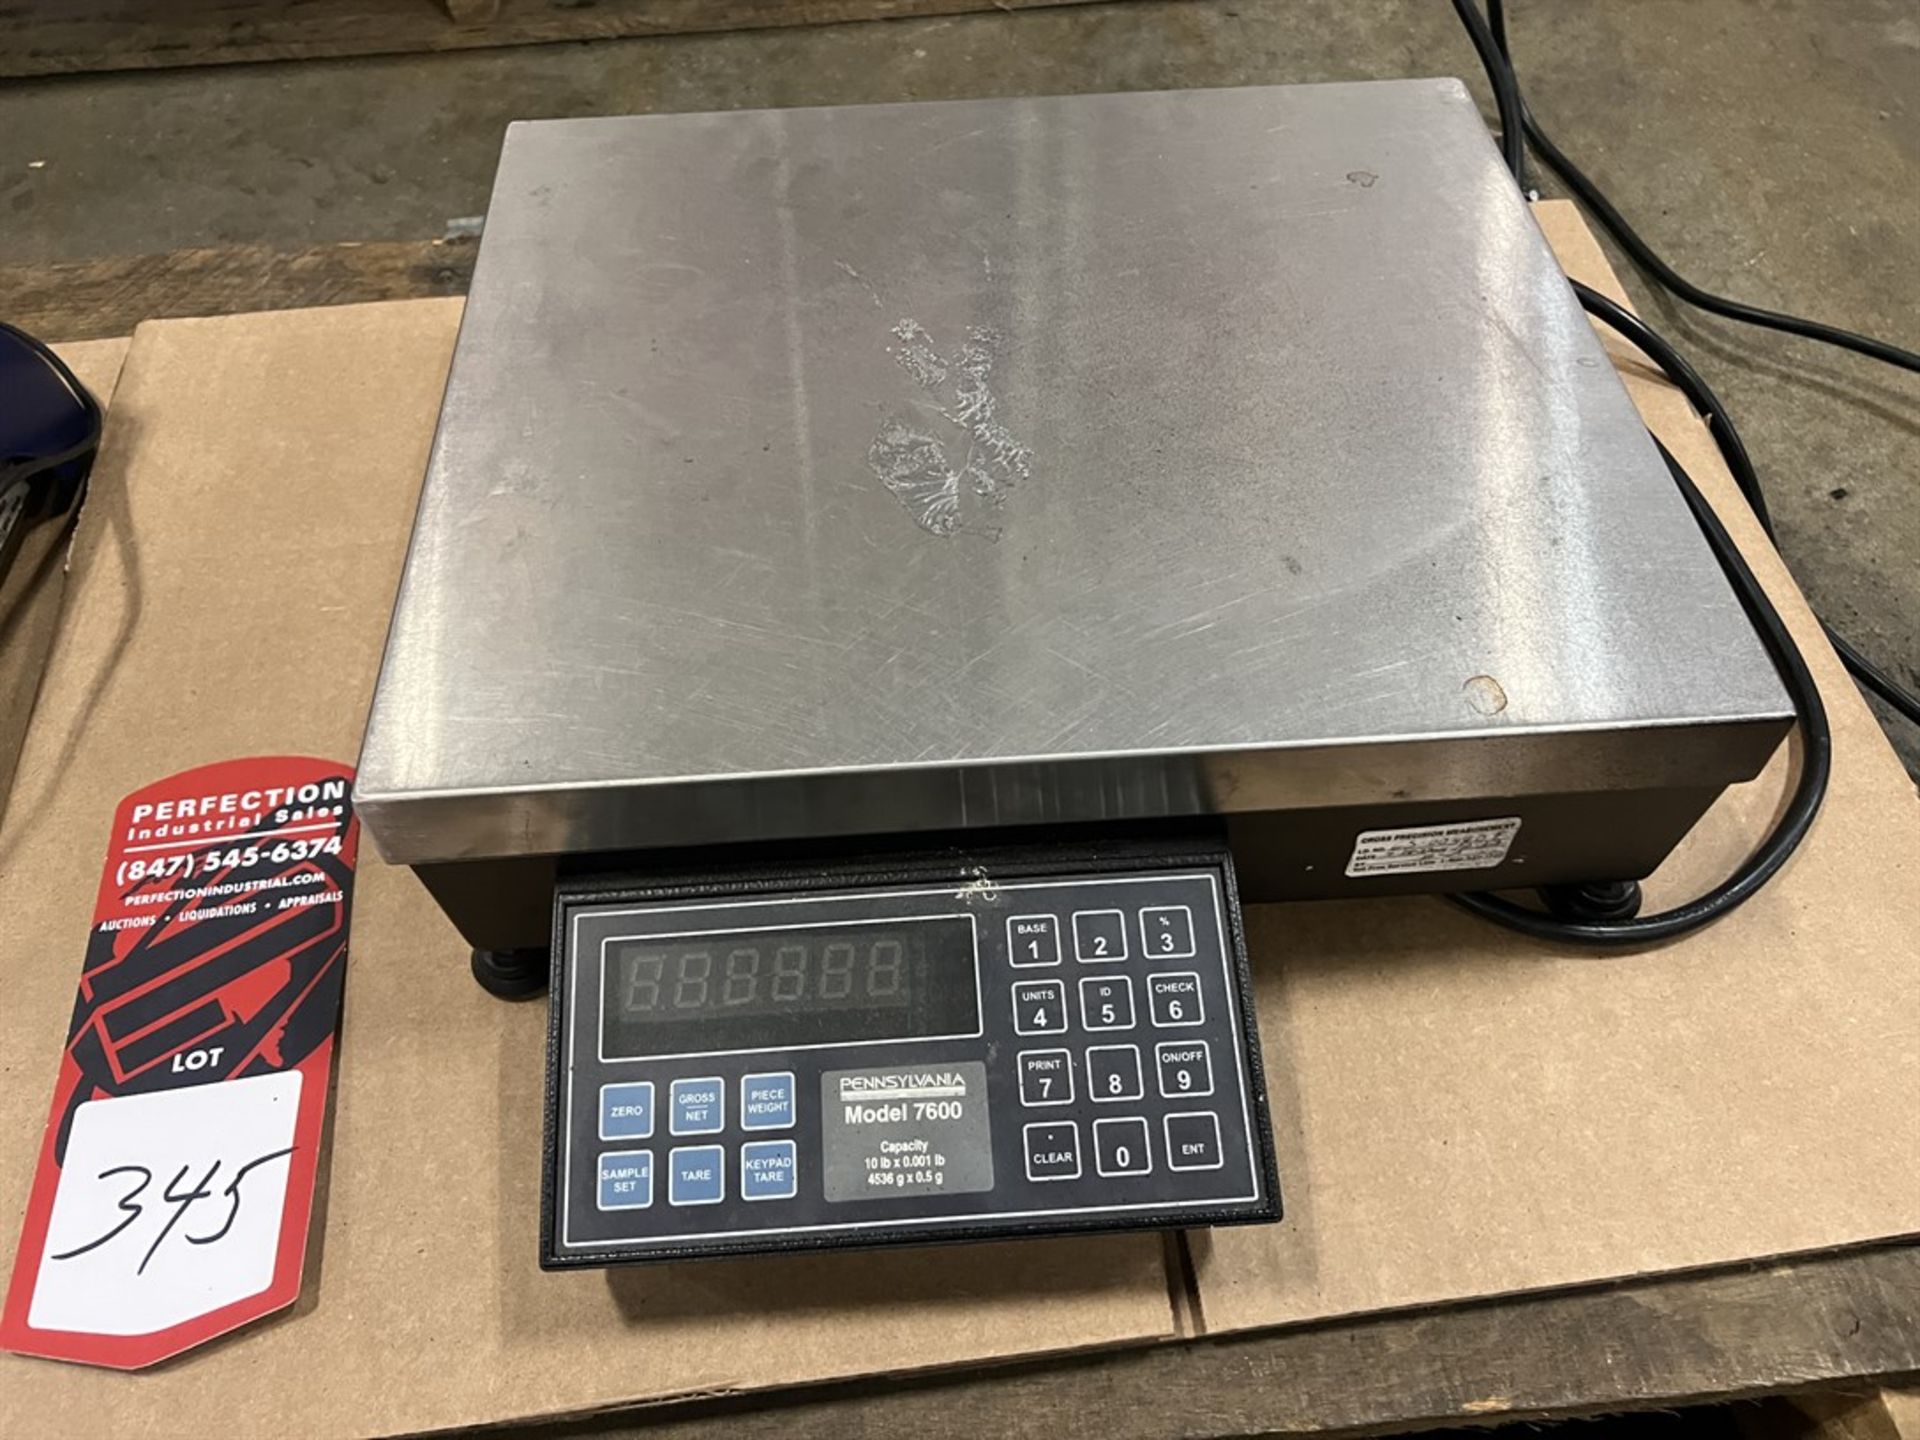 Lot Comprising METTLER TOLEDO Viper SD 30 and PENNSYLVANIA 7600 Digital Bench Top Scales - Image 2 of 3